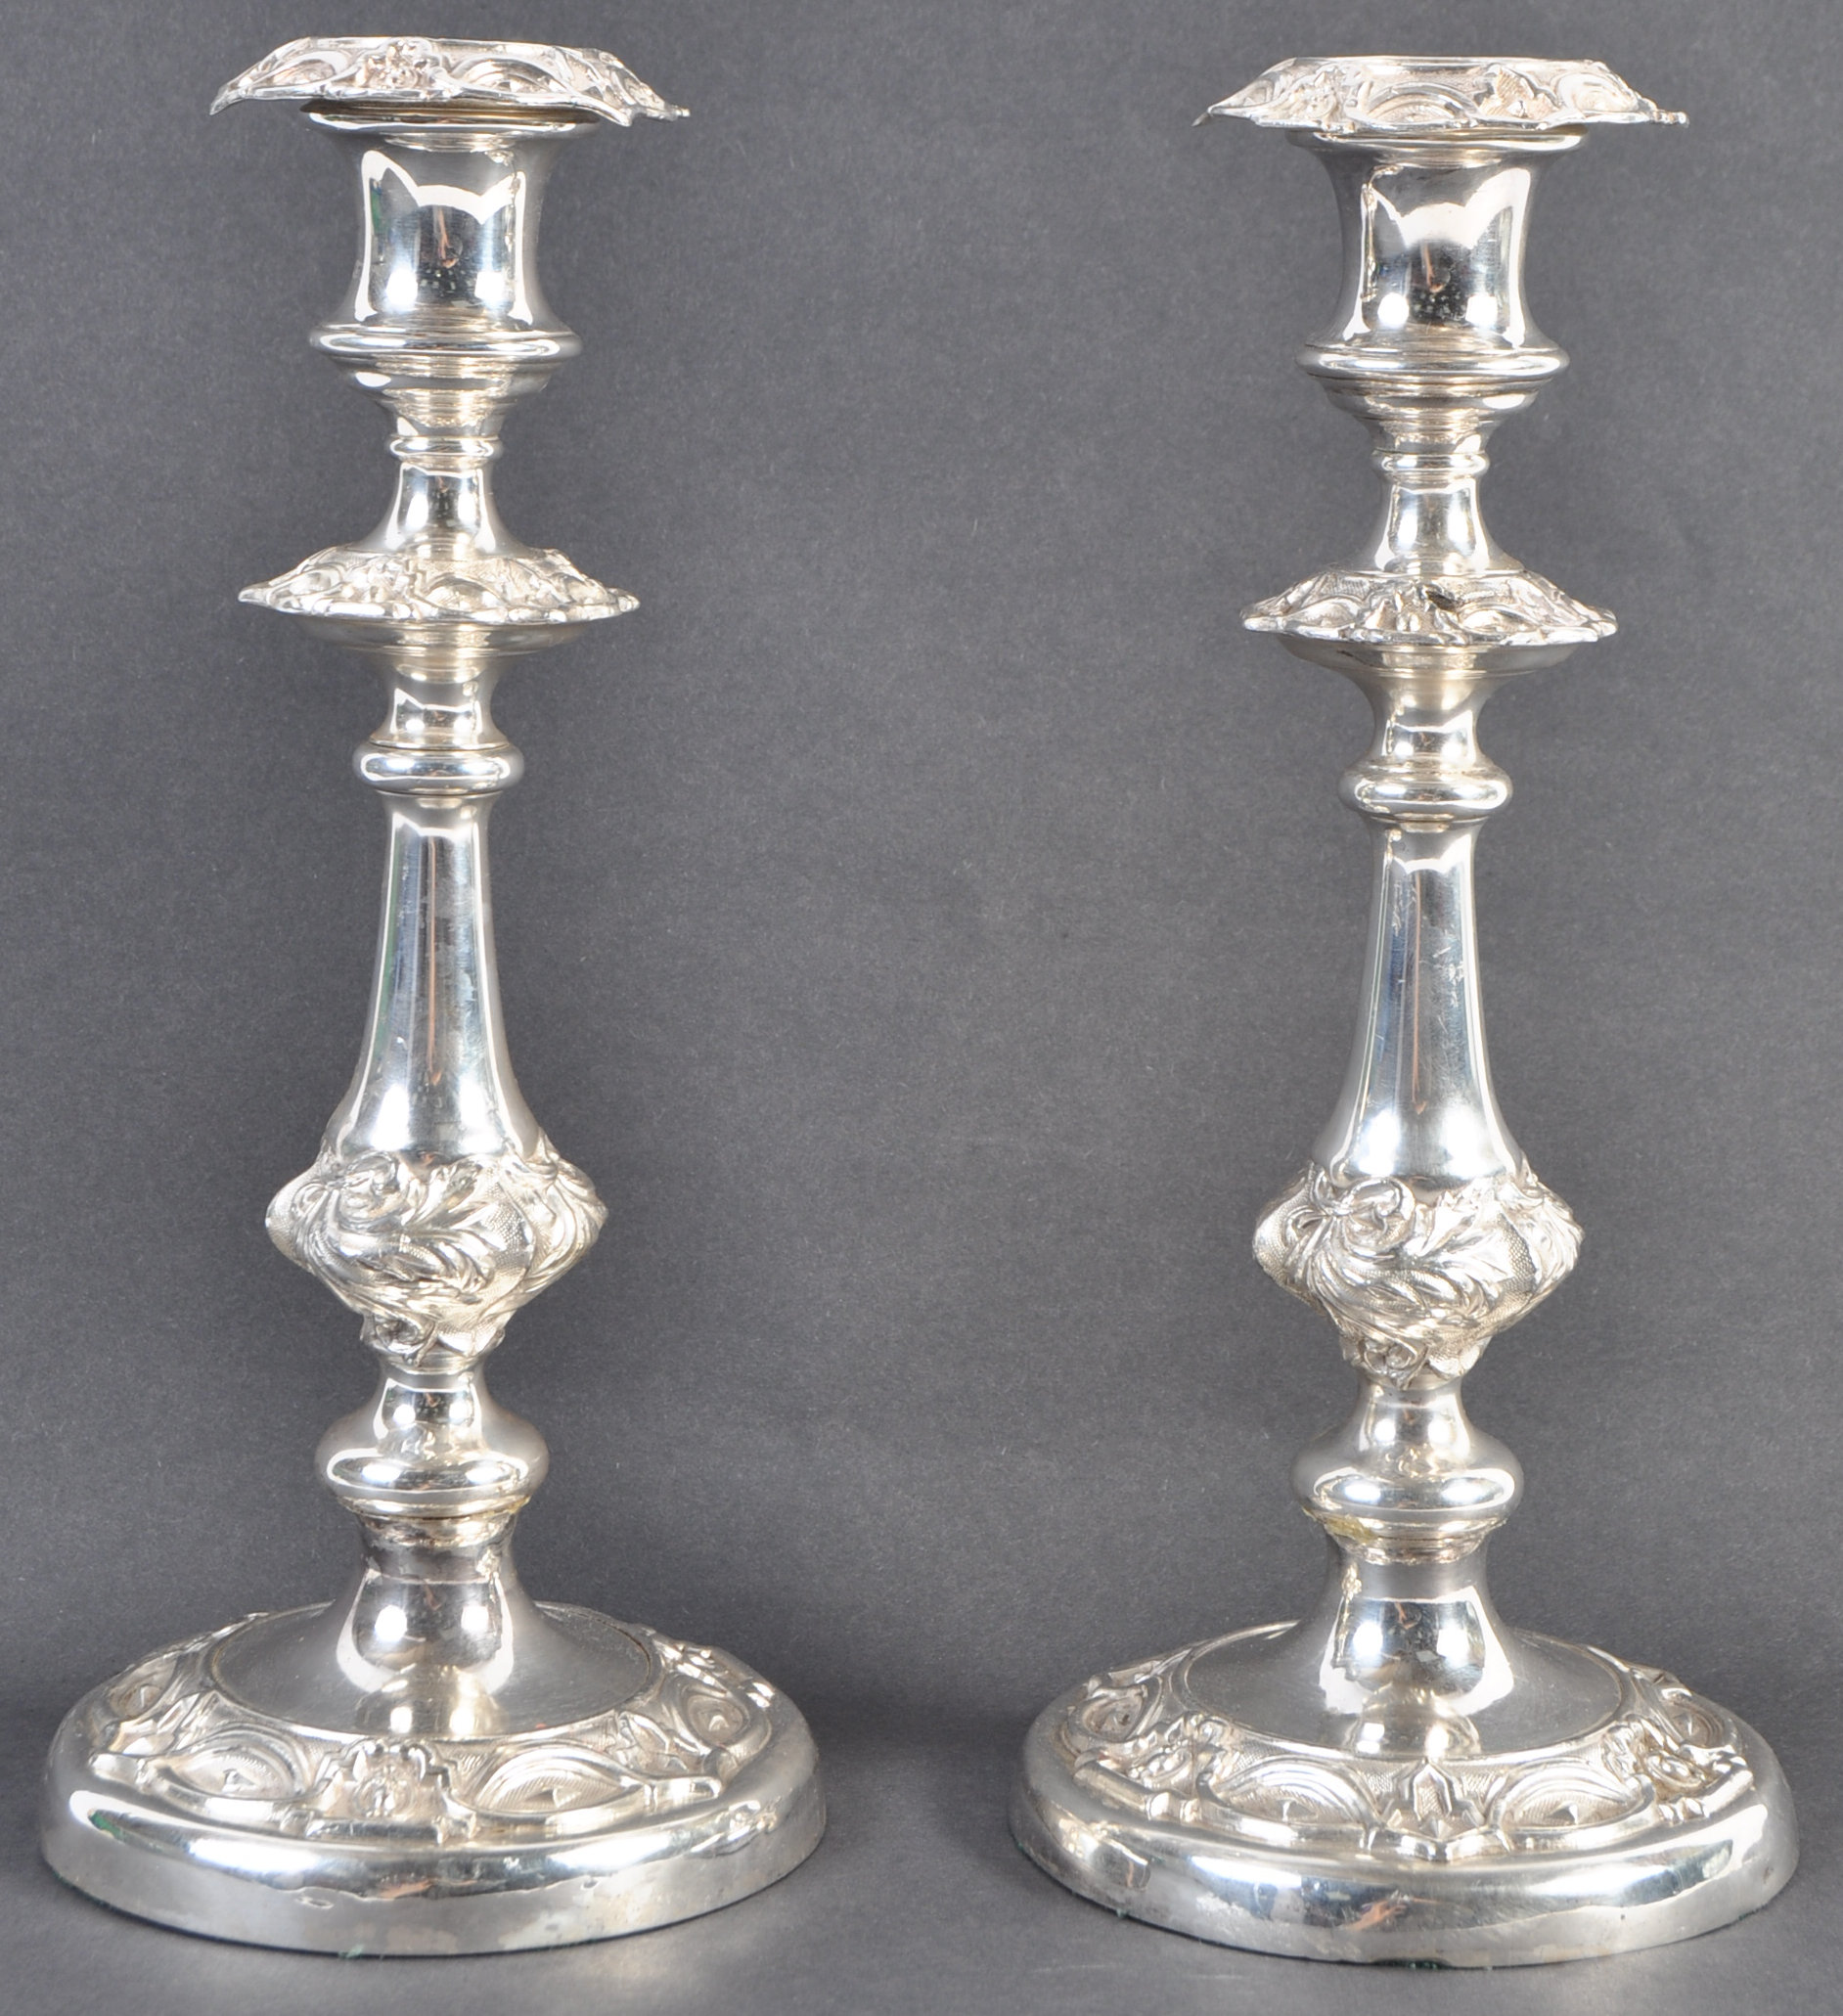 PAIR OF 19TH CENTURY SILVER WARRANTED TABLE CANDLE